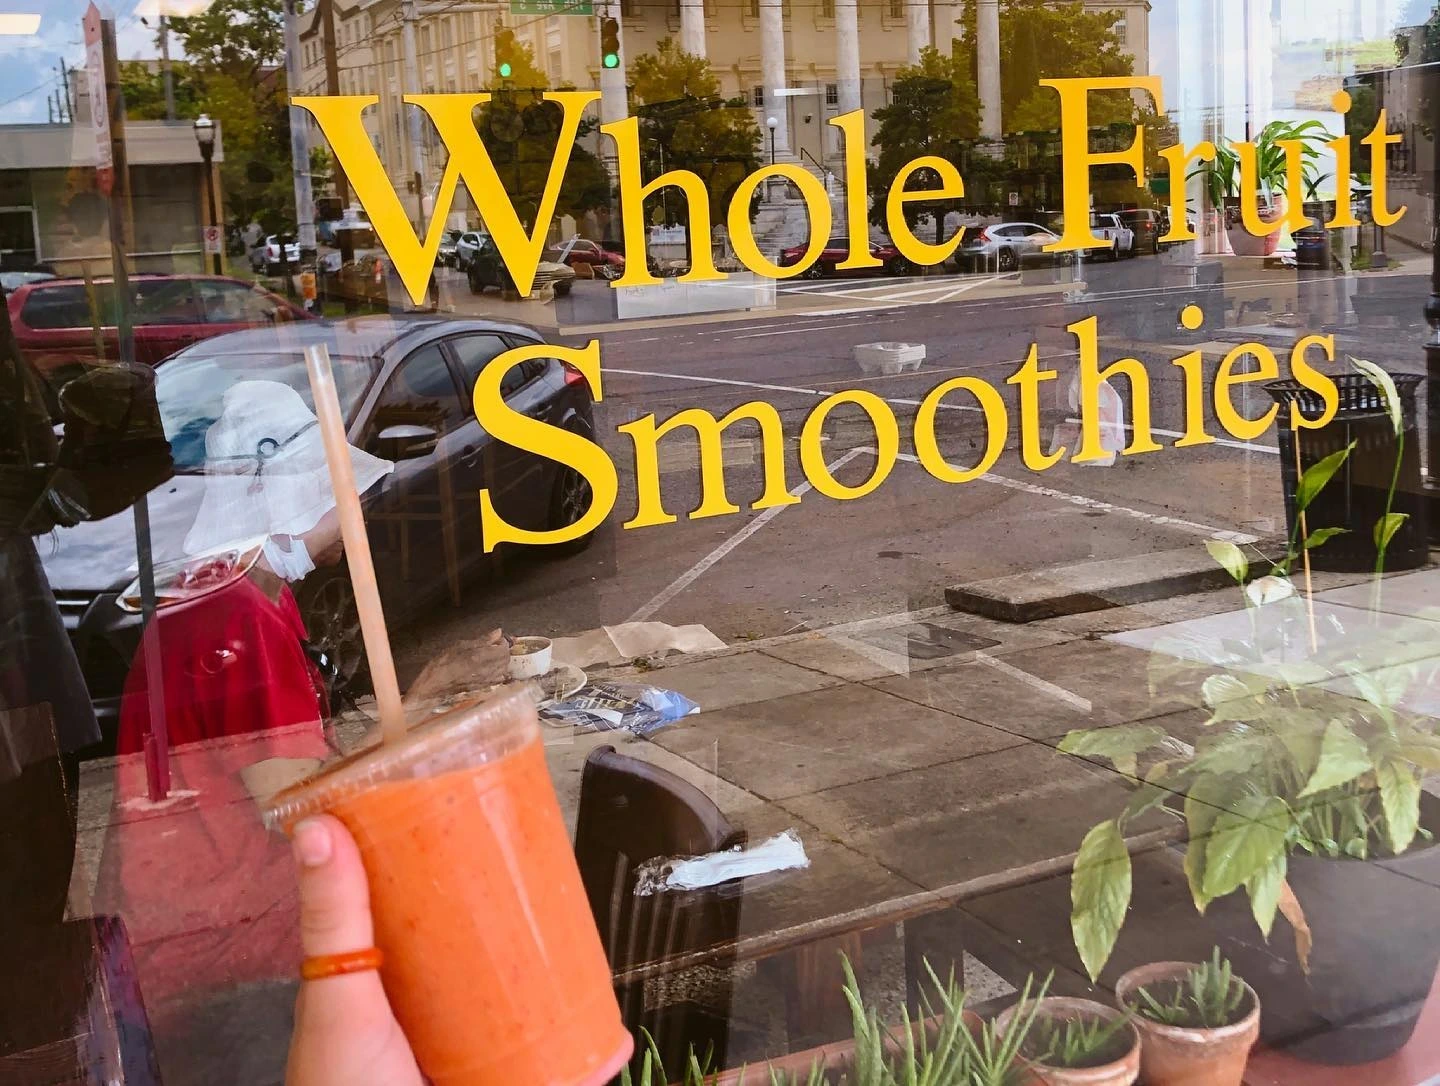 Whole Fruit Smoothies sign with a hand holding a pink smoothie up in front